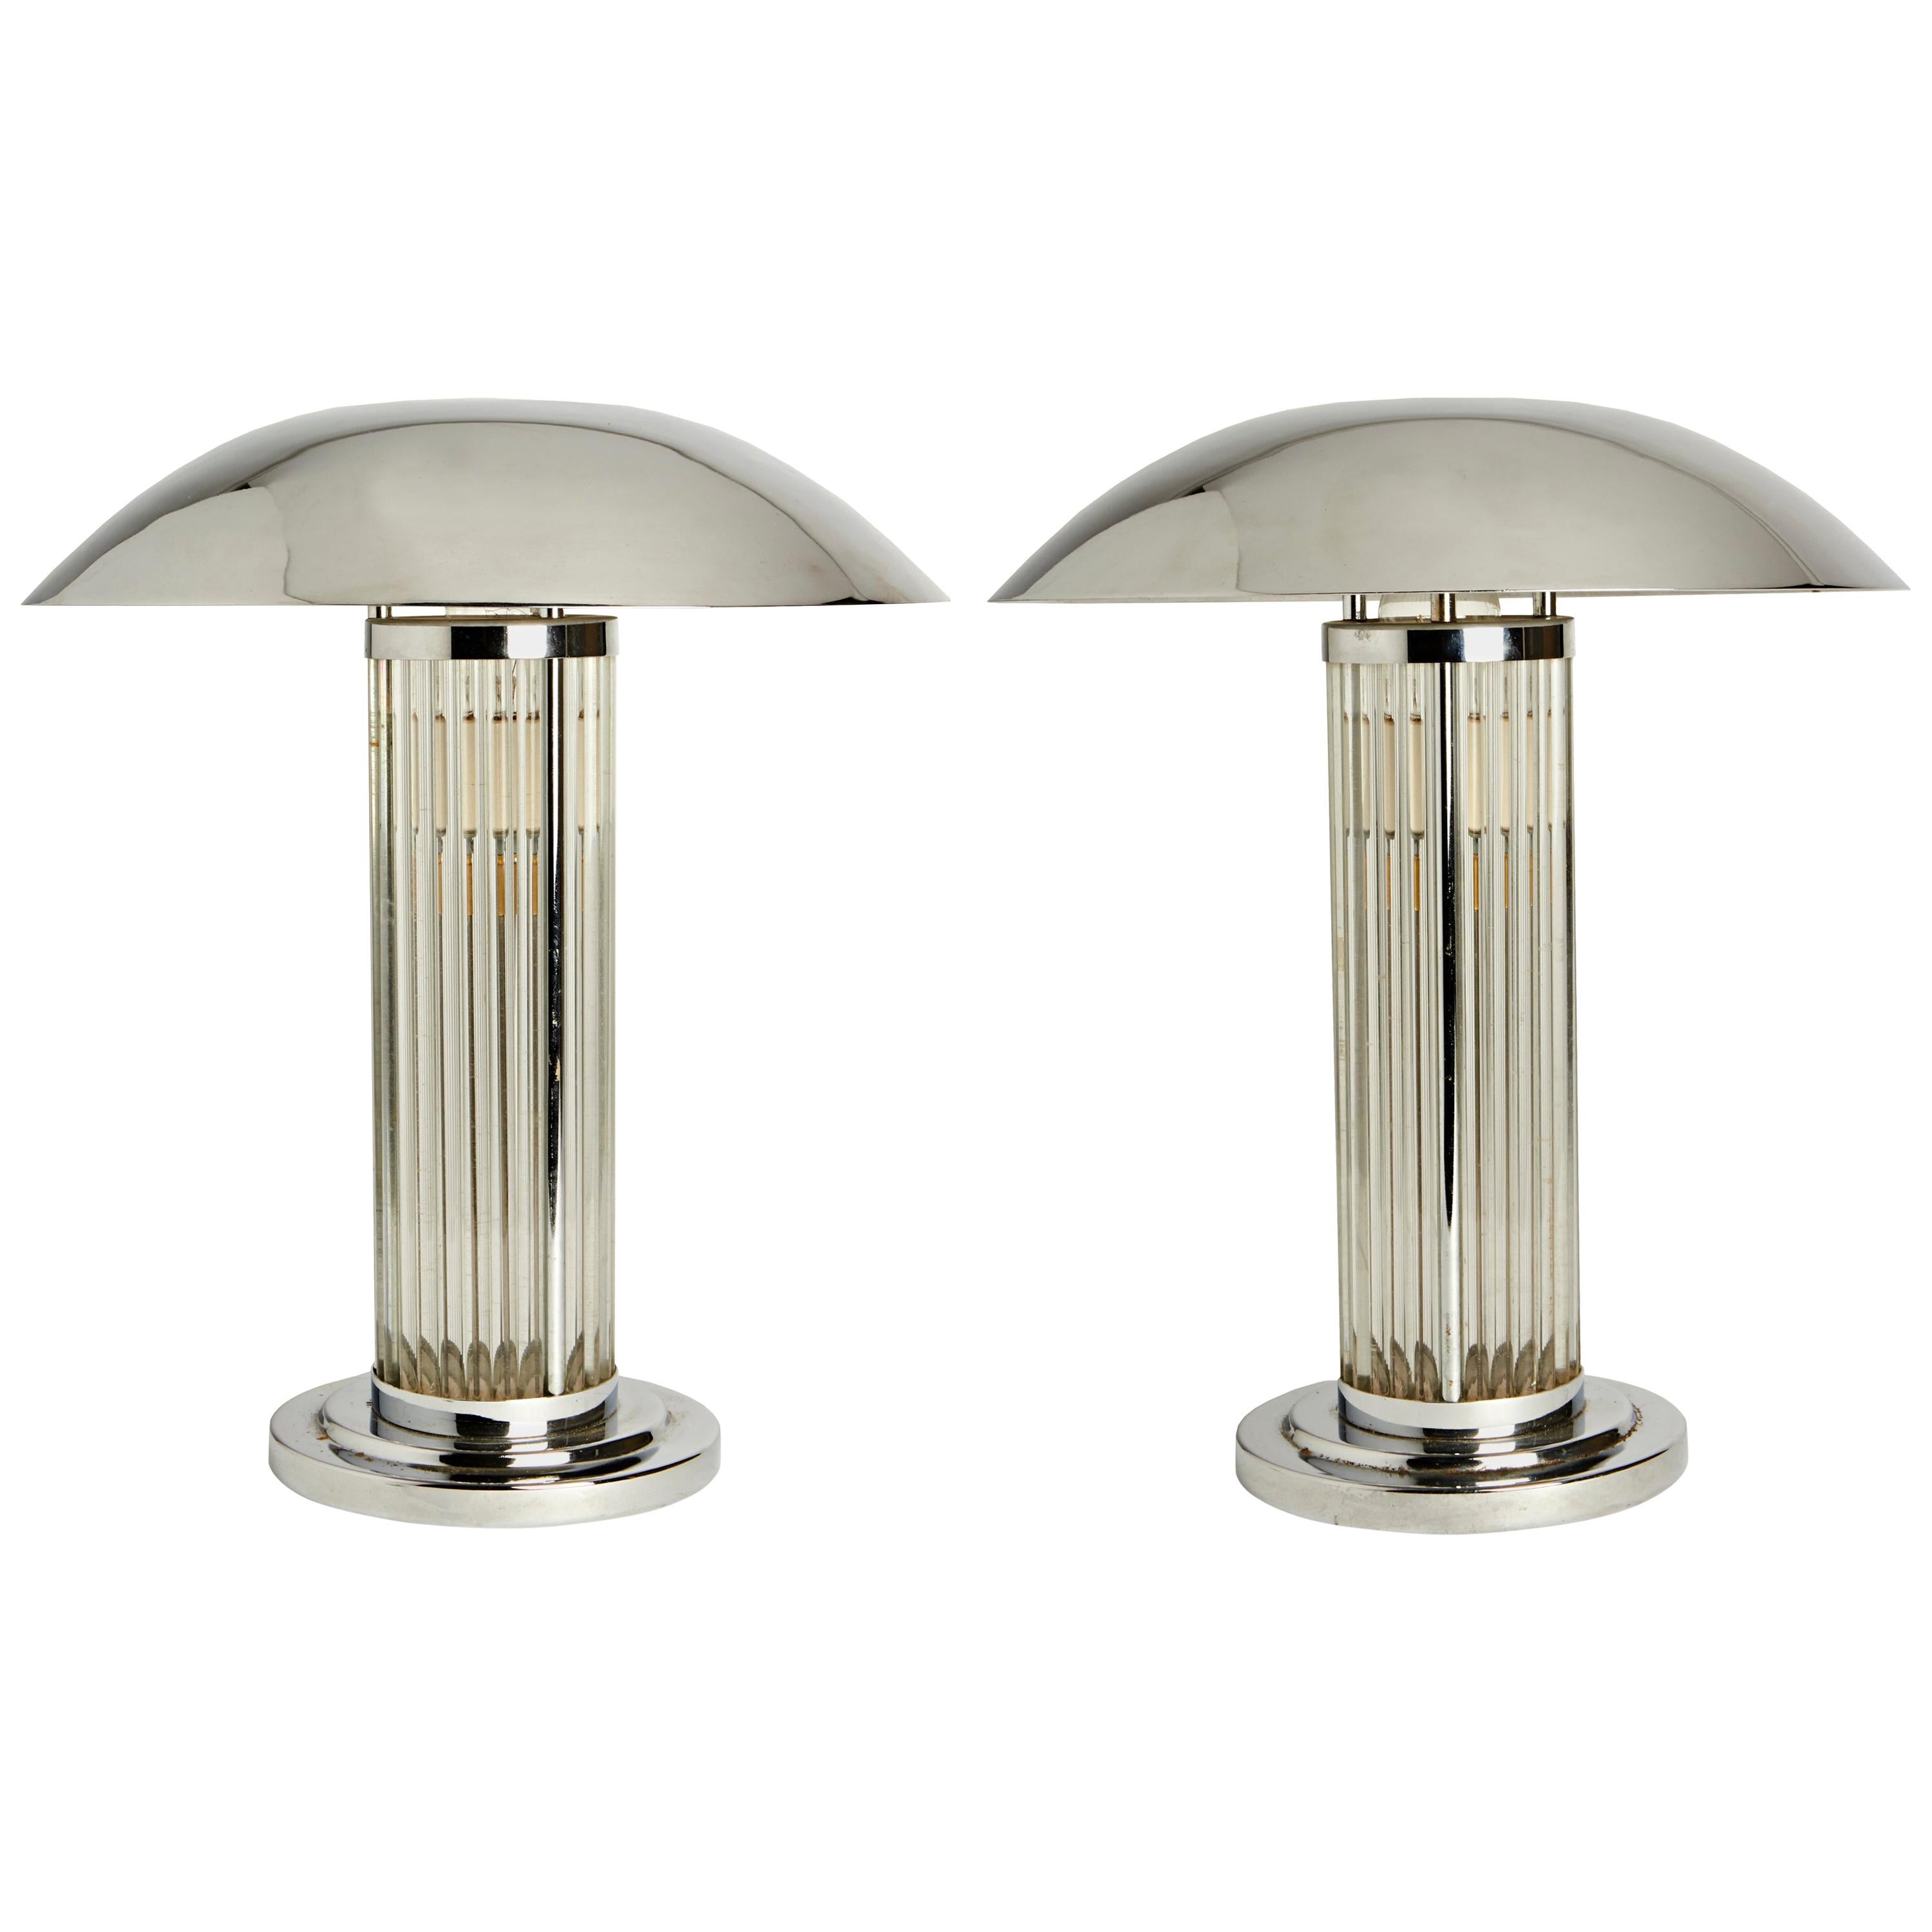 Pair of English Deco Revival Chrome and Glass Rod Lamps after Atelier Petitot